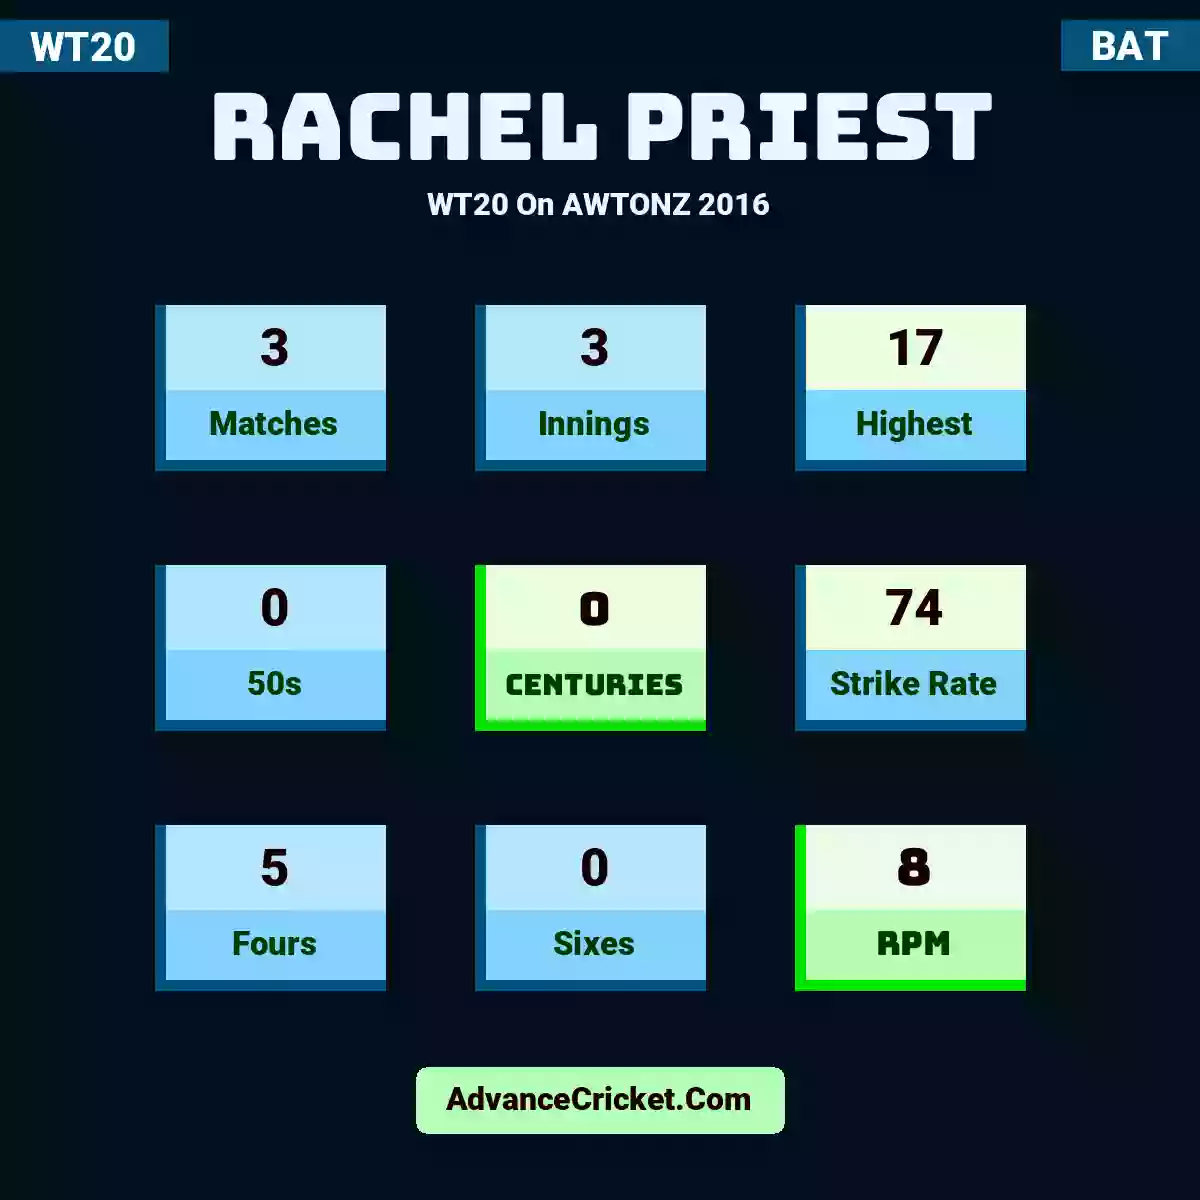 Rachel Priest WT20  On AWTONZ 2016, Rachel Priest played 3 matches, scored 17 runs as highest, 0 half-centuries, and 0 centuries, with a strike rate of 74. R.Priest hit 5 fours and 0 sixes, with an RPM of 8.